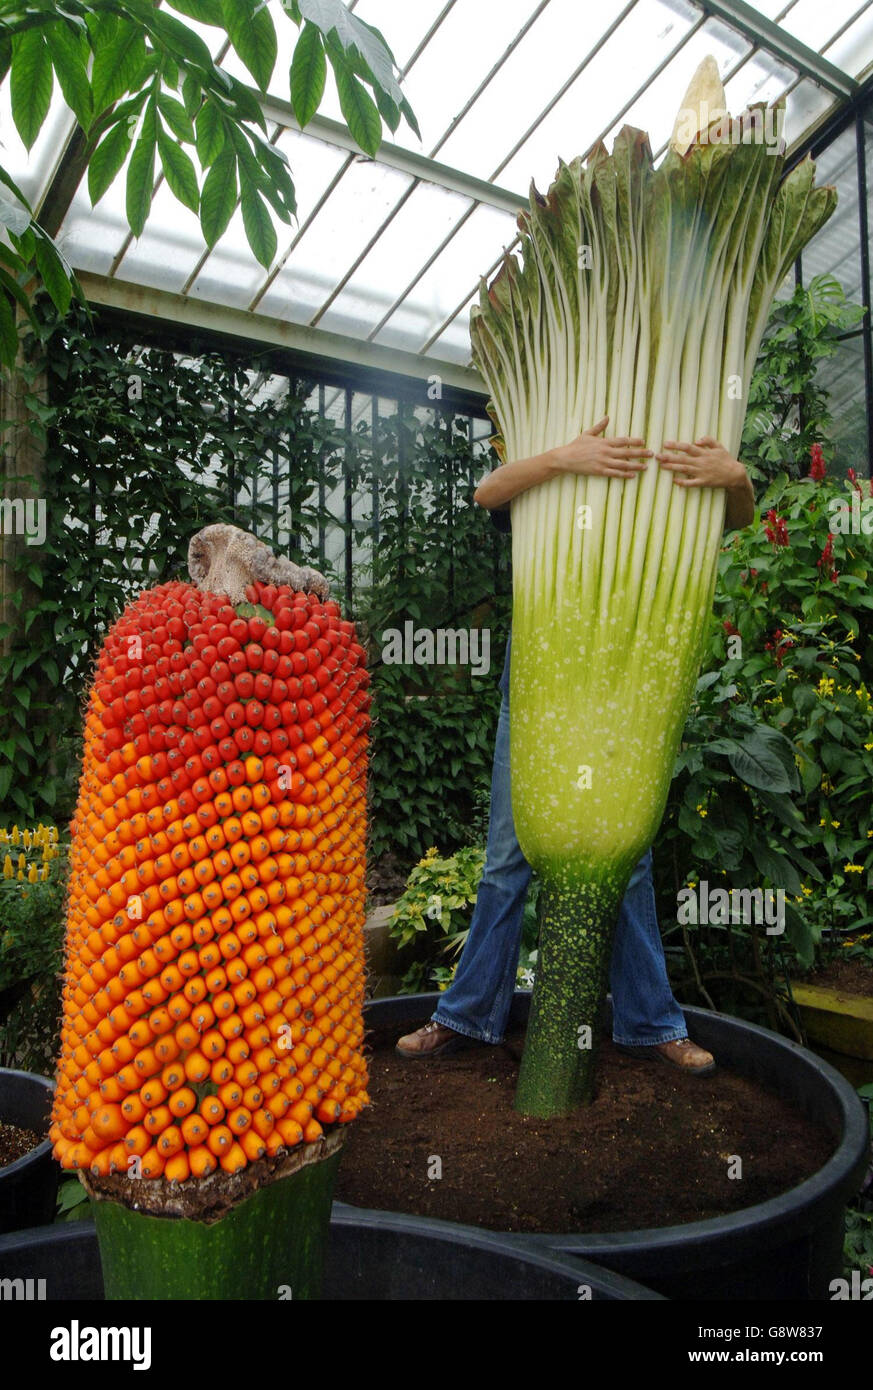 The three life cycles of a Titan arum lily, leaf (top left), fruit and flower on display at the Royal Botanic Gardens in Kew, Surrey today, Wednesday September 28 2005. The event is a horticultural first for the gardens in that all three stages have not taken place simutaneously before. PRESS ASSOCIATION photo. Photo credit should read: Fiona Hanson/PA Stock Photo